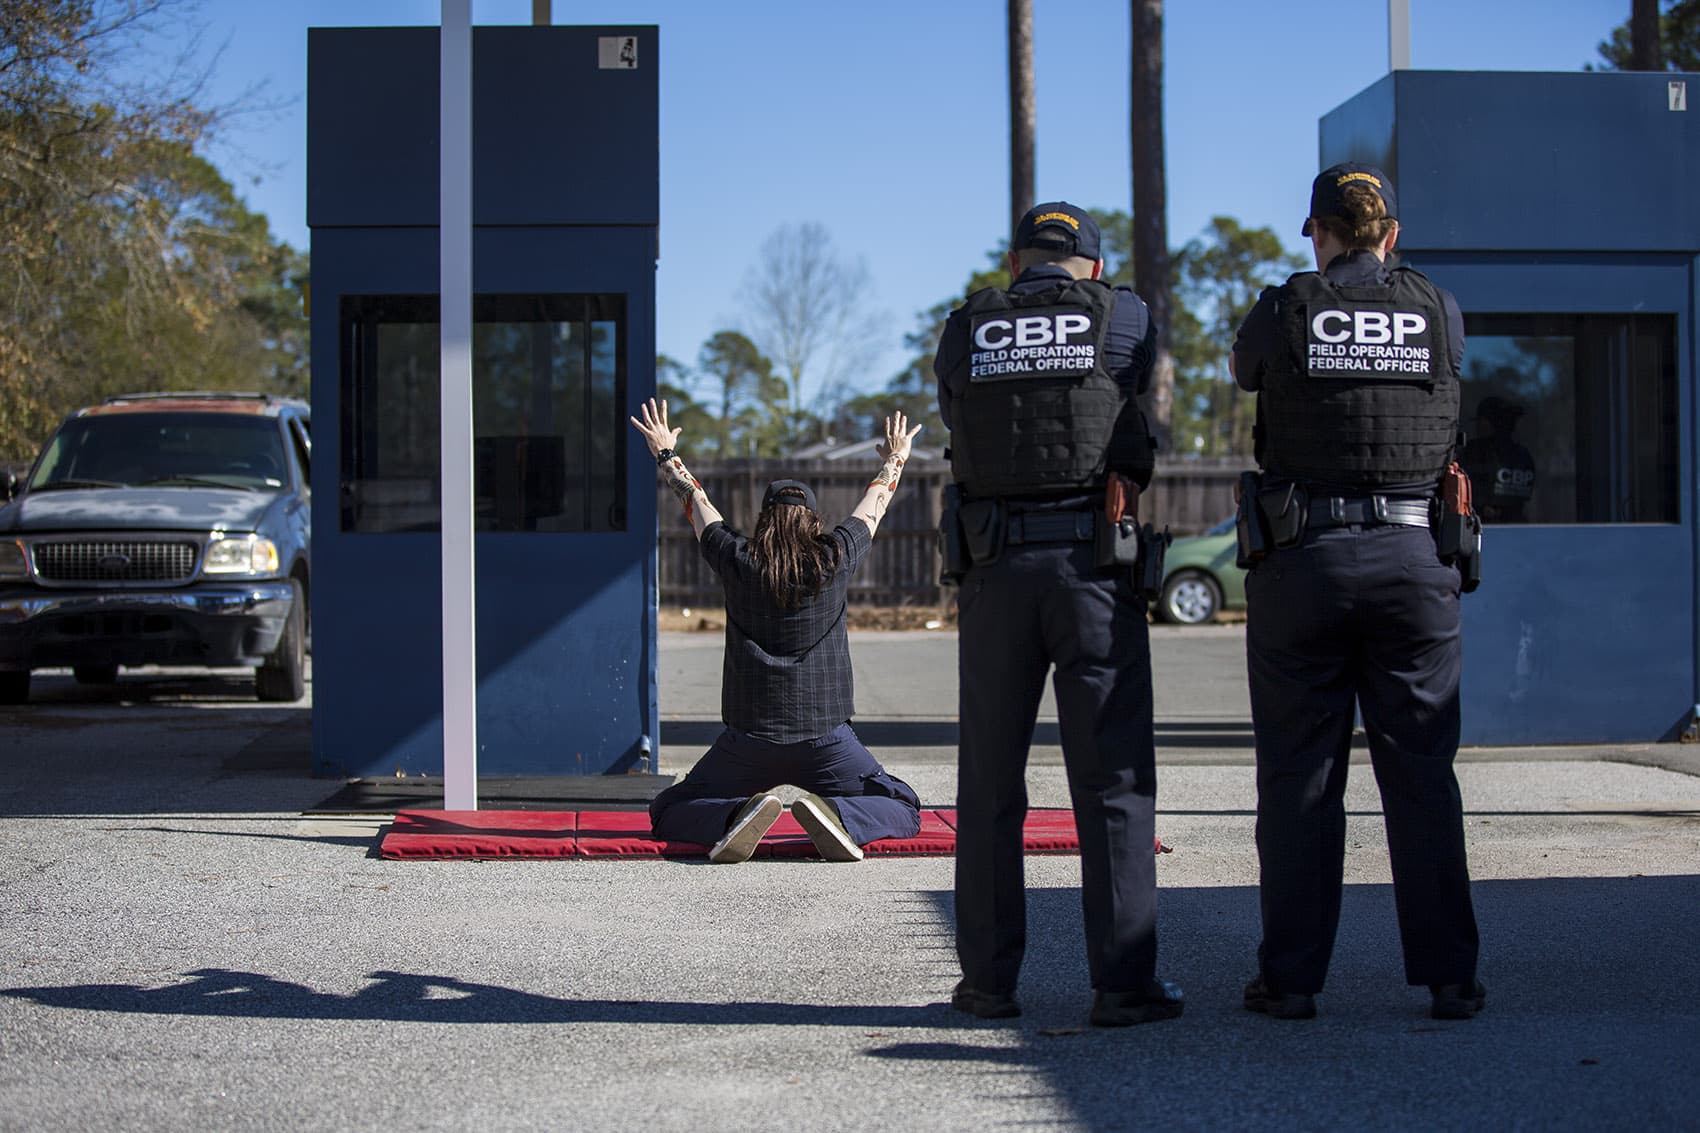 At the federal law enforcement training center in Brunswick, Georgia, U.S. Customs and Border Protection officer trainees conduct a border crossing drill. (Jesse Costa/WBUR)